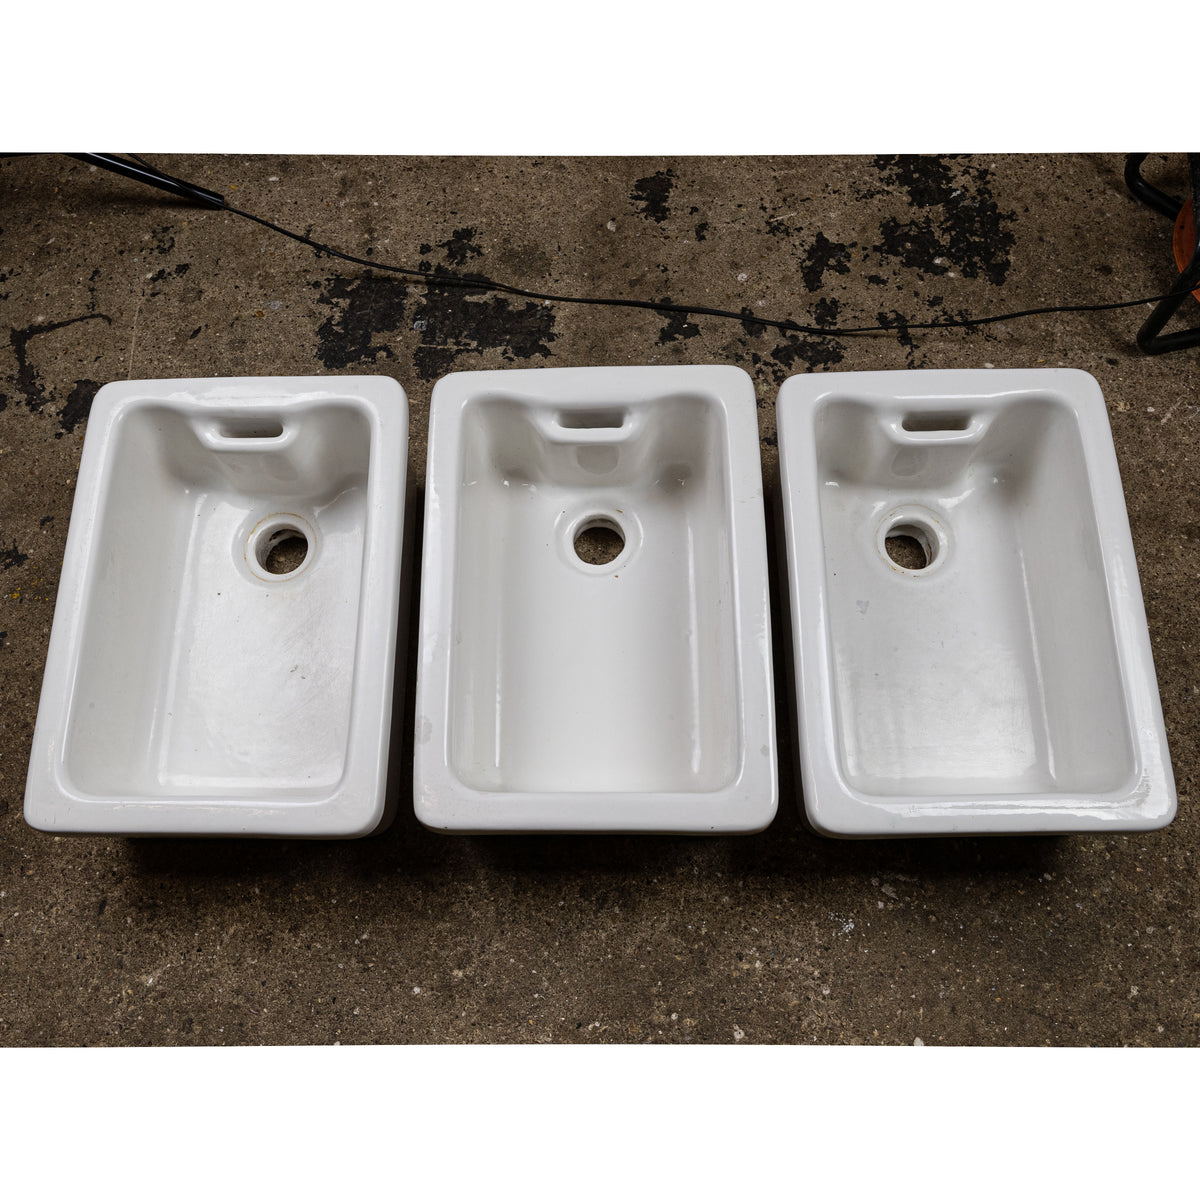 Reclaimed Royal Doulton School Butler Sinks (many available) | The Architectural Forum